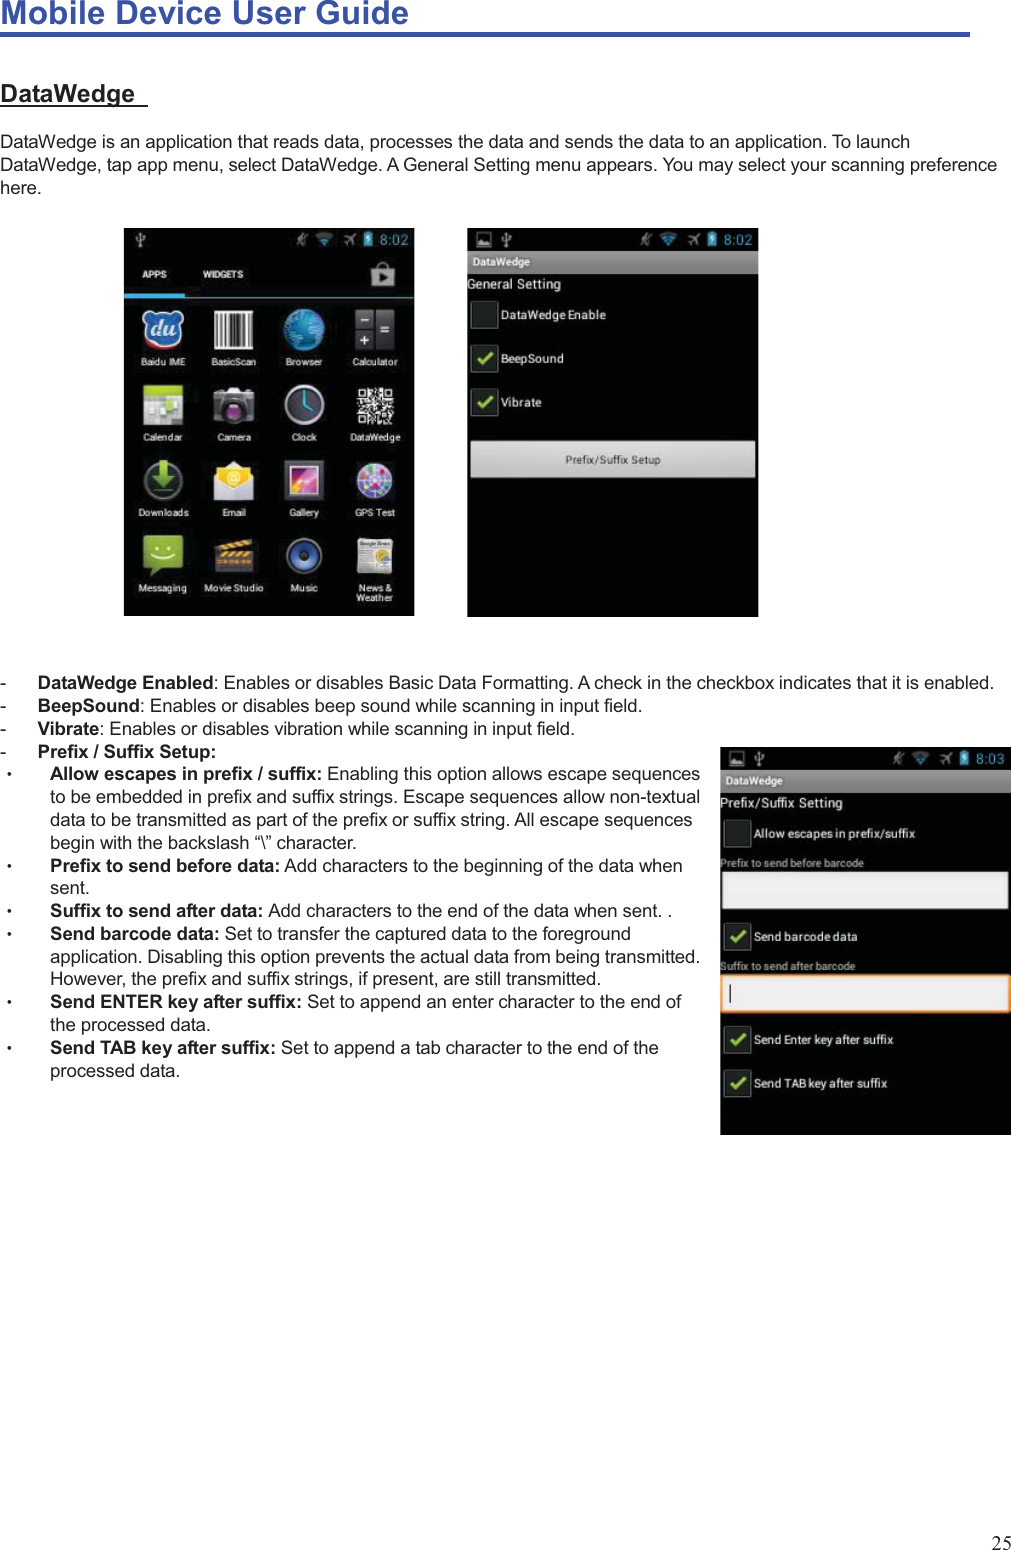 Mobile Device User Guide                                                                                                                                                                                                                                                                                                                                                                                                                                                                                                                                             25 DataWedge  DataWedge is an application that reads data, processes the data and sends the data to an application. To launch DataWedge, tap app menu, select DataWedge. A General Setting menu appears. You may select your scanning preference here.              -  DataWedge Enabled: Enables or disables Basic Data Formatting. A check in the checkbox indicates that it is enabled. -  BeepSound: Enables or disables beep sound while scanning in input field. -  Vibrate: Enables or disables vibration while scanning in input field. -  Prefix / Suffix Setup: Θʳ Allow escapes in prefix / suffix: Enabling this option allows escape sequences to be embedded in prefix and suffix strings. Escape sequences allow non-textual data to be transmitted as part of the prefix or suffix string. All escape sequences begin with the backslash “\” character. Θʳ Prefix to send before data: Add characters to the beginning of the data when             sent.  Θʳ Suffix to send after data: Add characters to the end of the data when sent. . Θʳ Send barcode data: Set to transfer the captured data to the foreground application. Disabling this option prevents the actual data from being transmitted. However, the prefix and suffix strings, if present, are still transmitted. Θʳ Send ENTER key after suffix: Set to append an enter character to the end of the processed data.   Θʳ Send TAB key after suffix: Set to append a tab character to the end of the processed data.                   